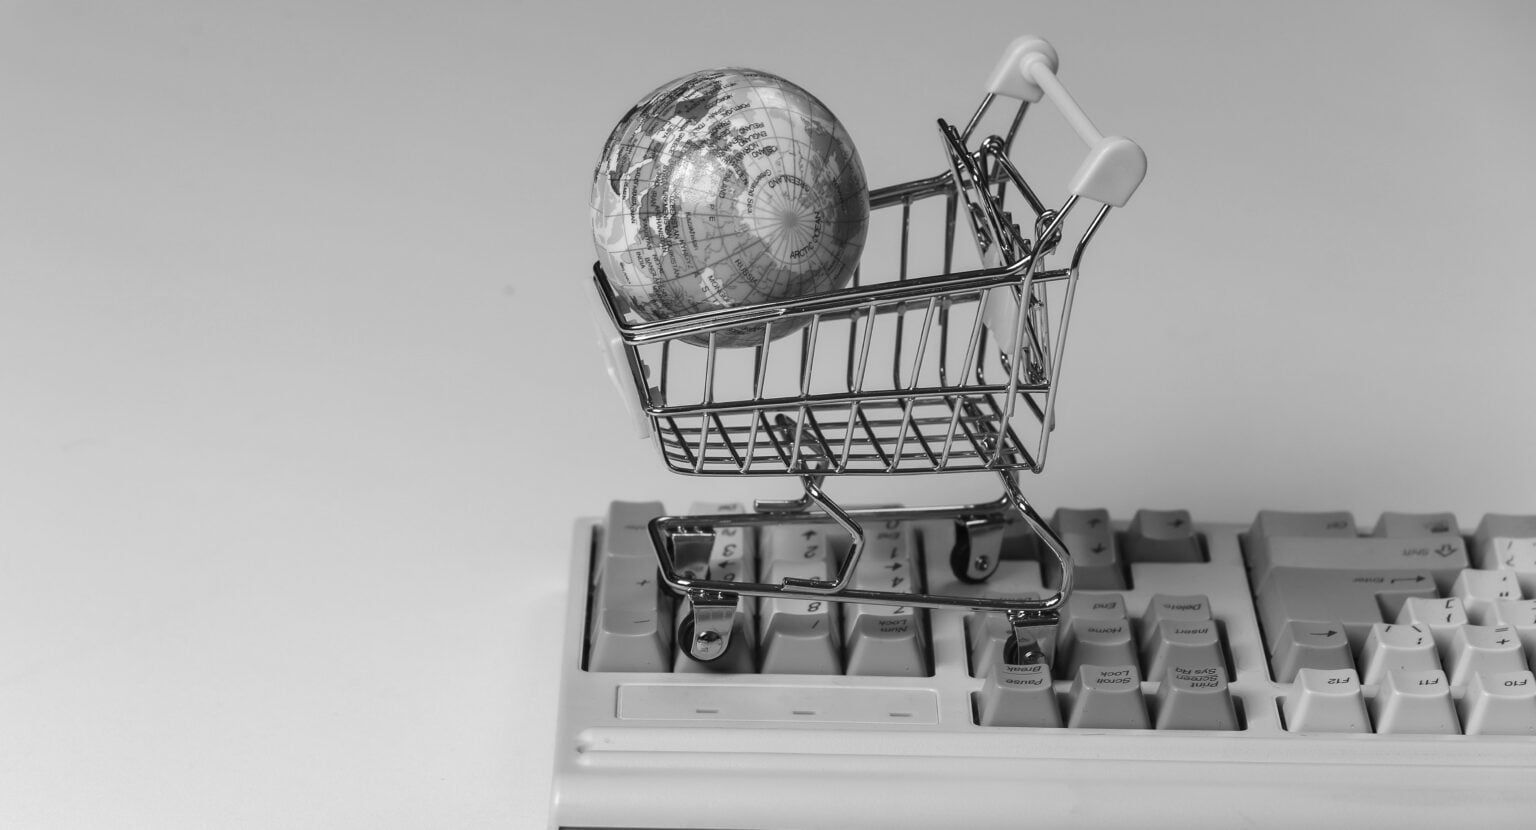 shopping-trolley-with-globe-old-pc-keyboard